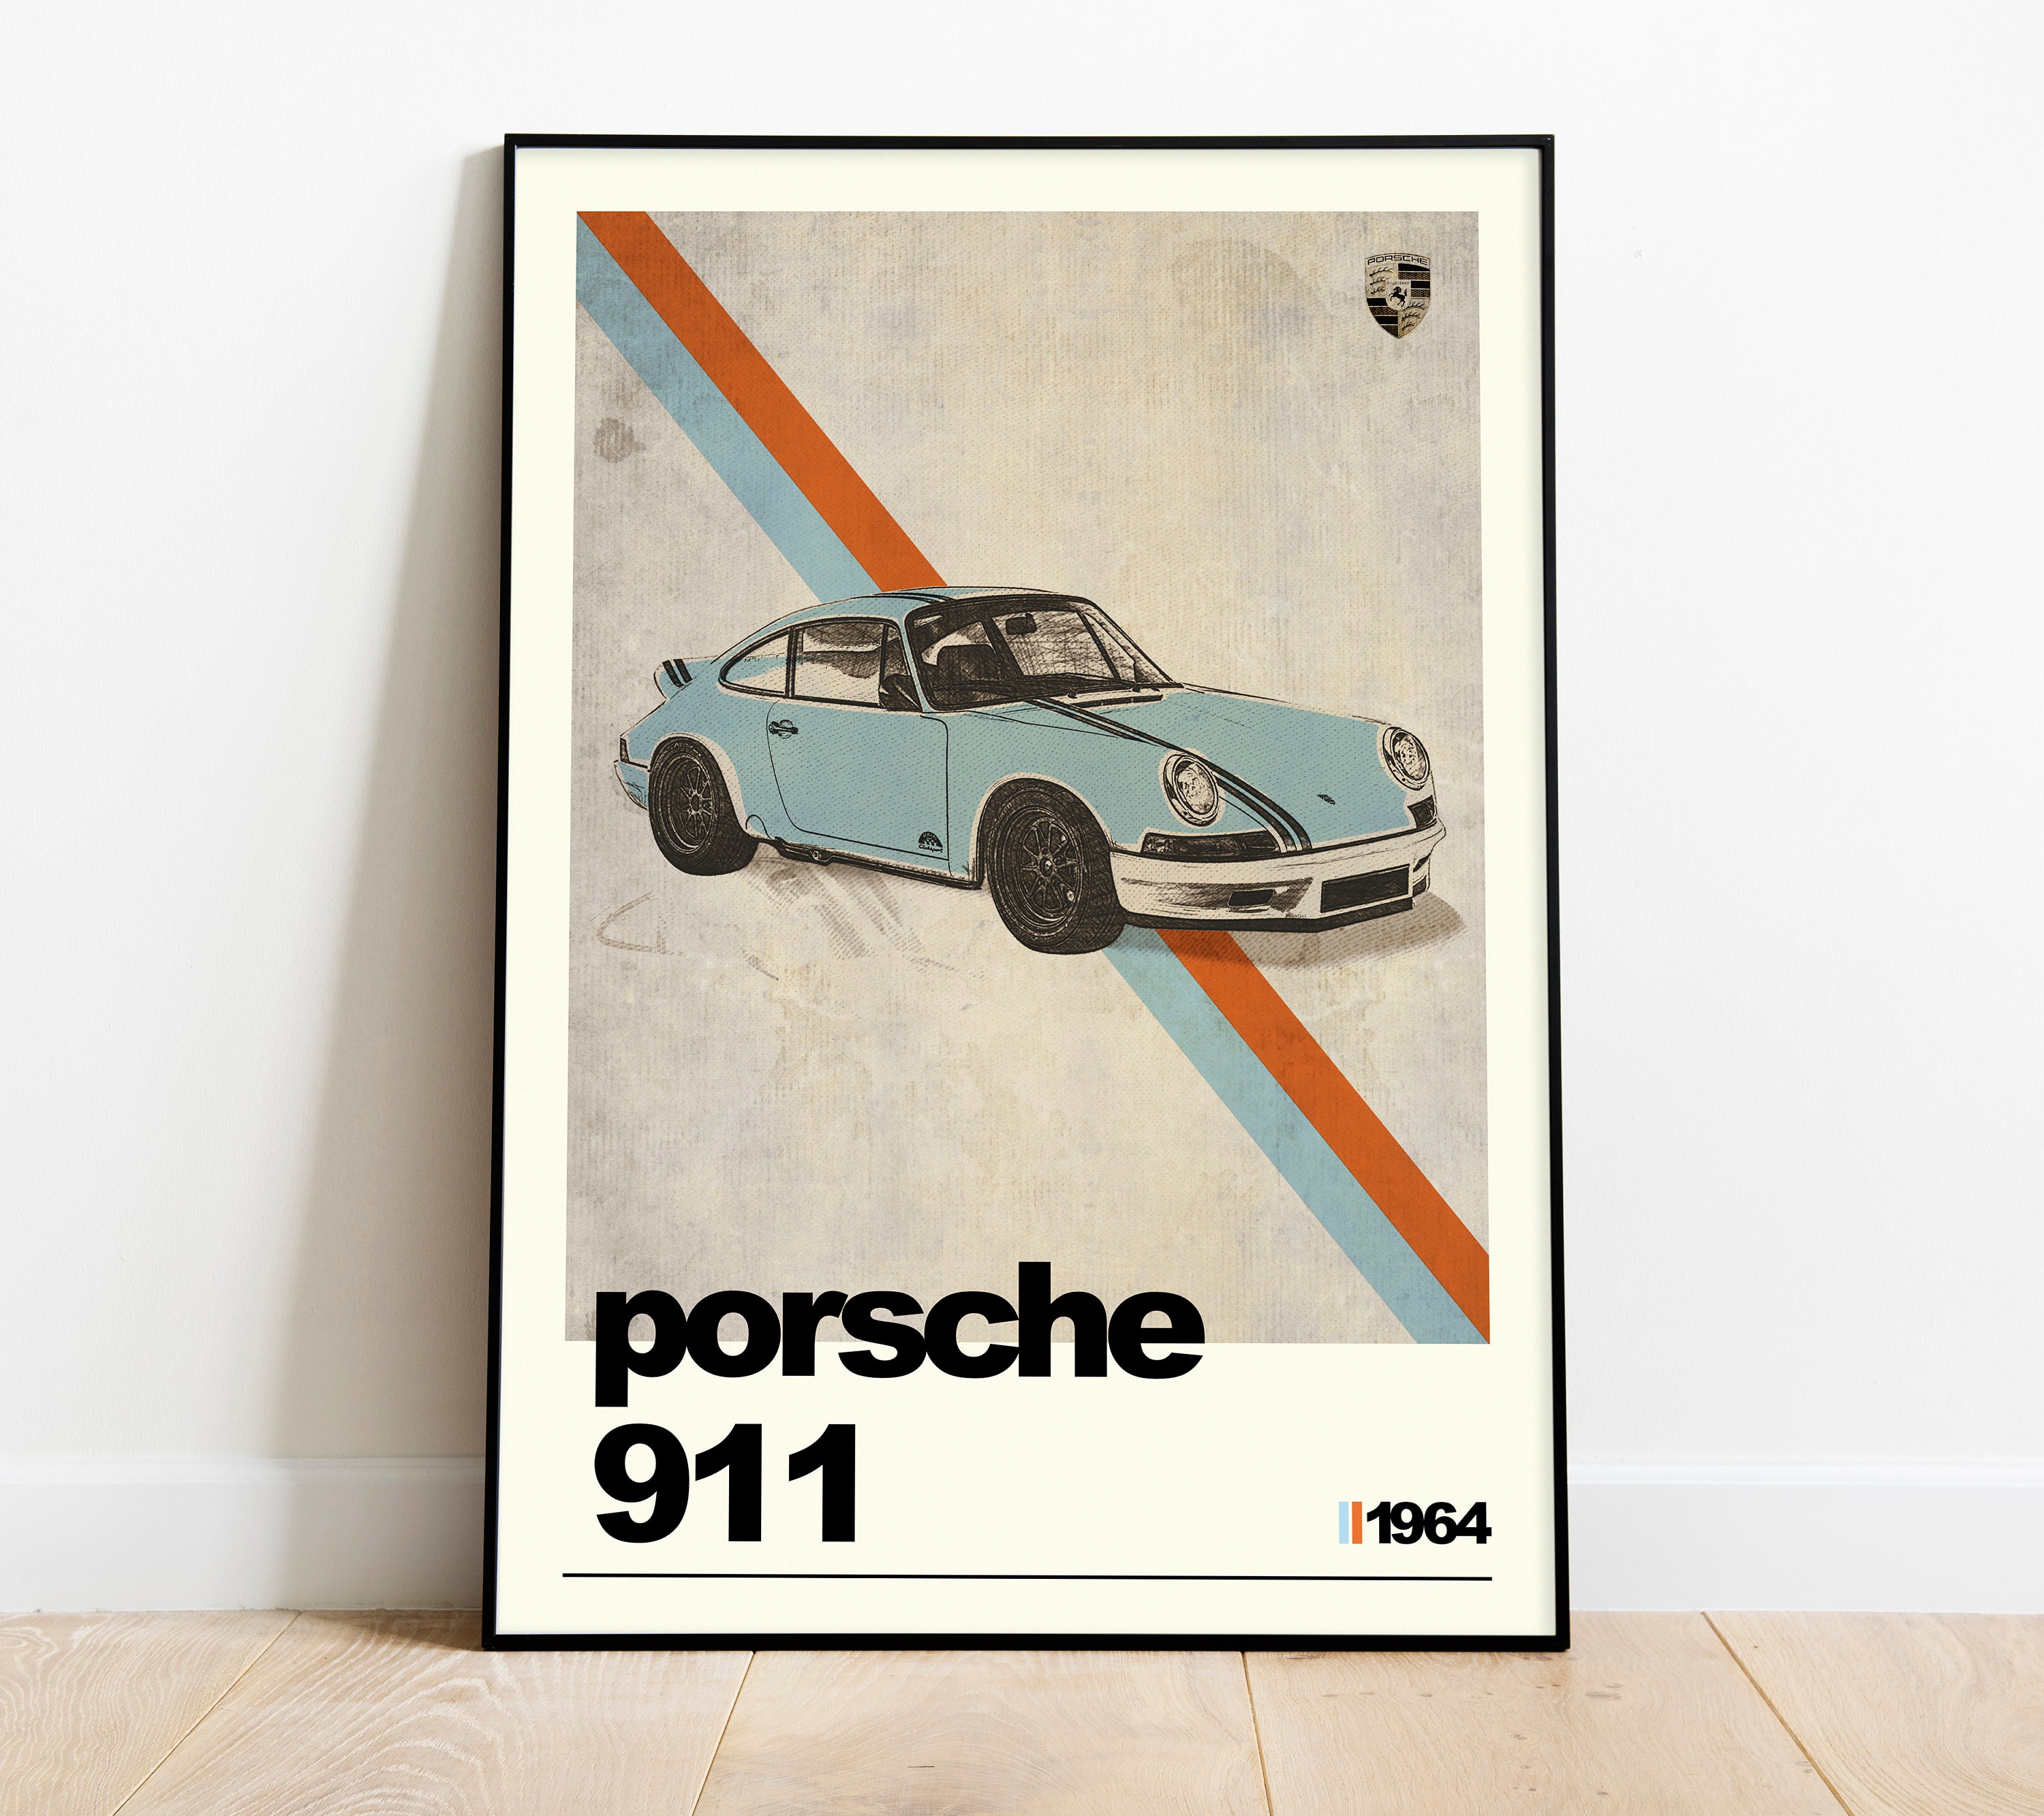 Porsche 911 Turbo Poster, Vintage Classic Car Poster, Iconic